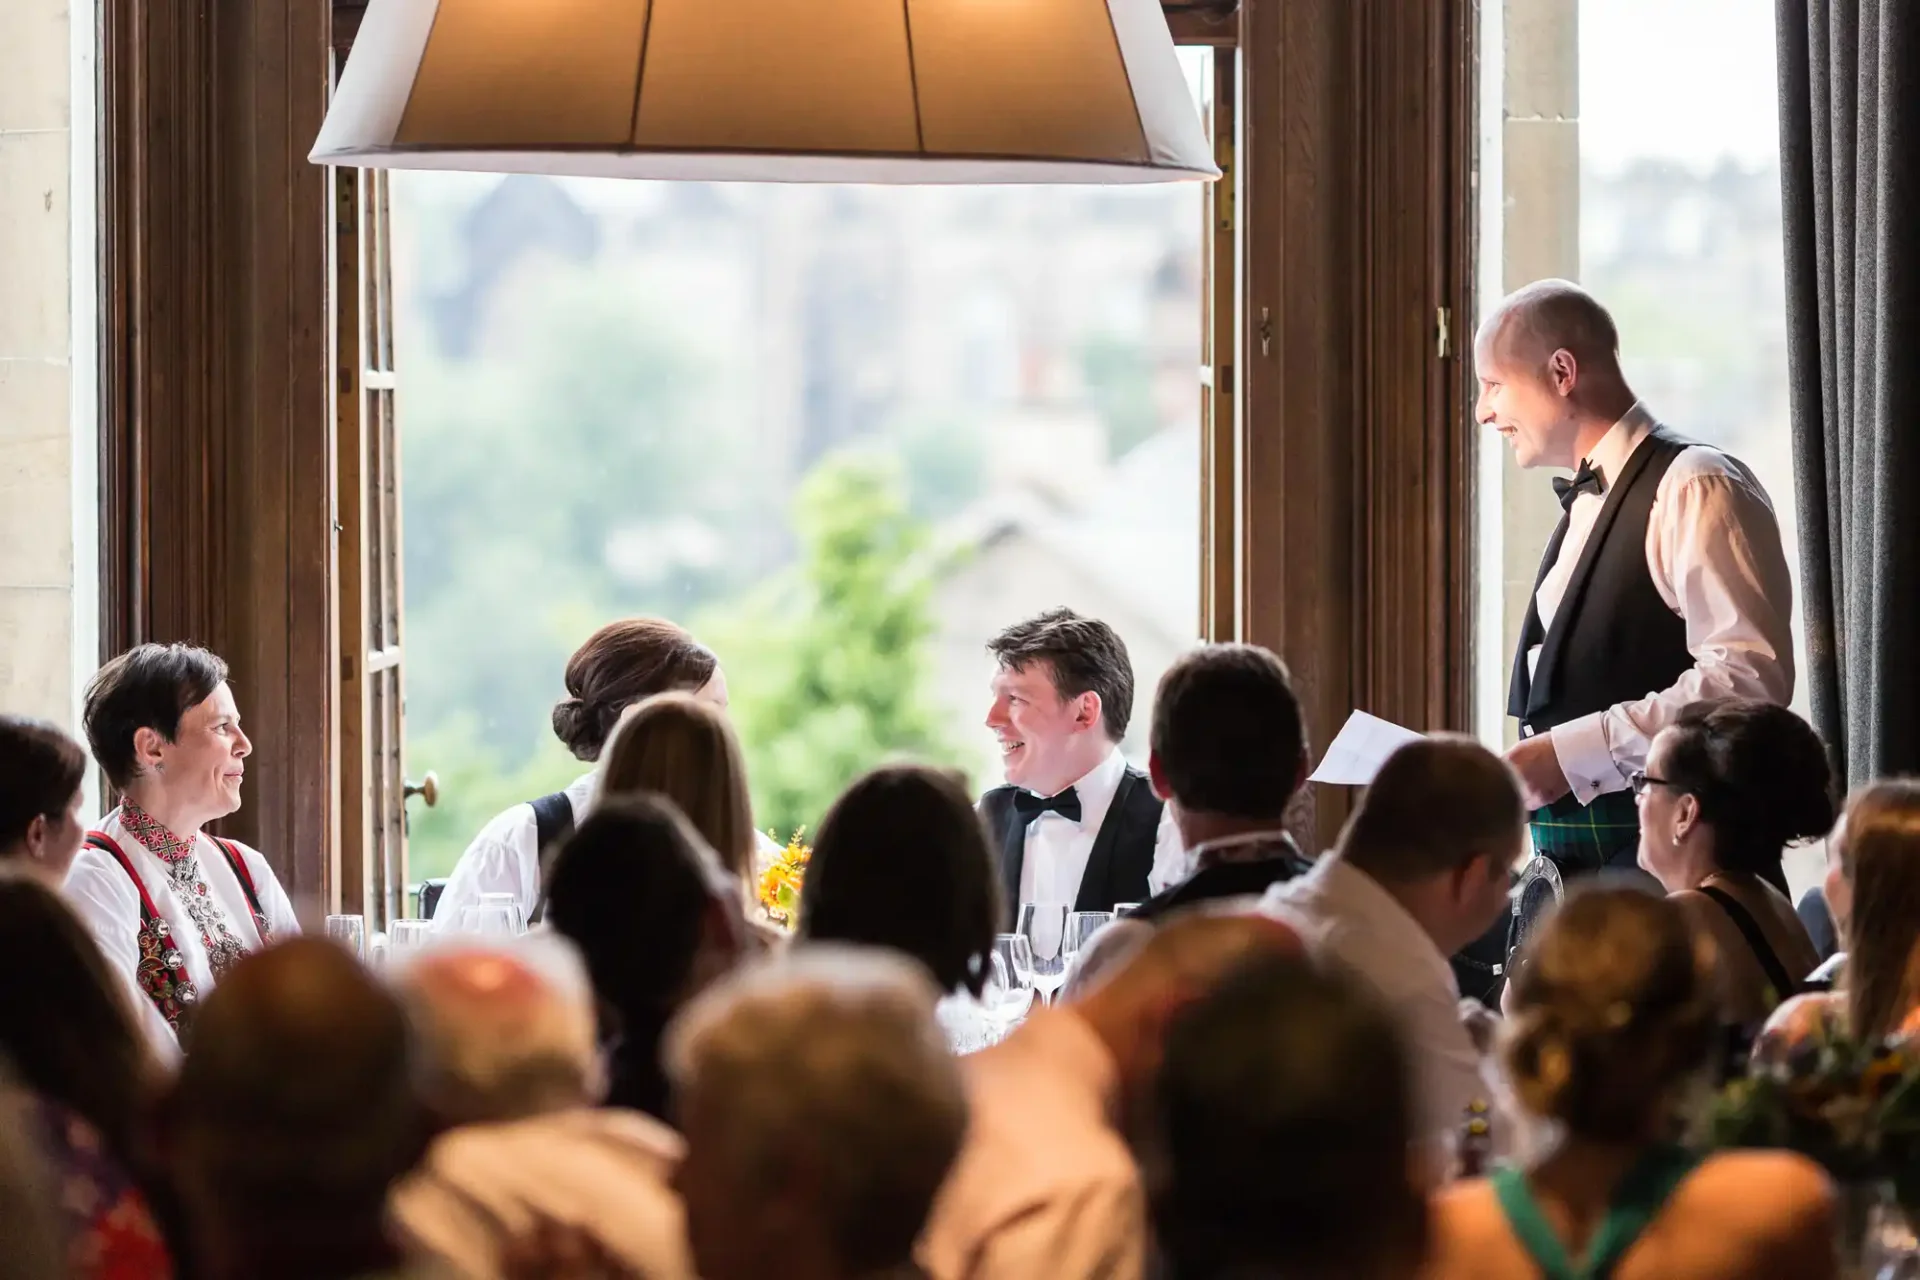 A man stands speaking to guests at a wedding reception inside a room with large windows overlooking a scenic view.